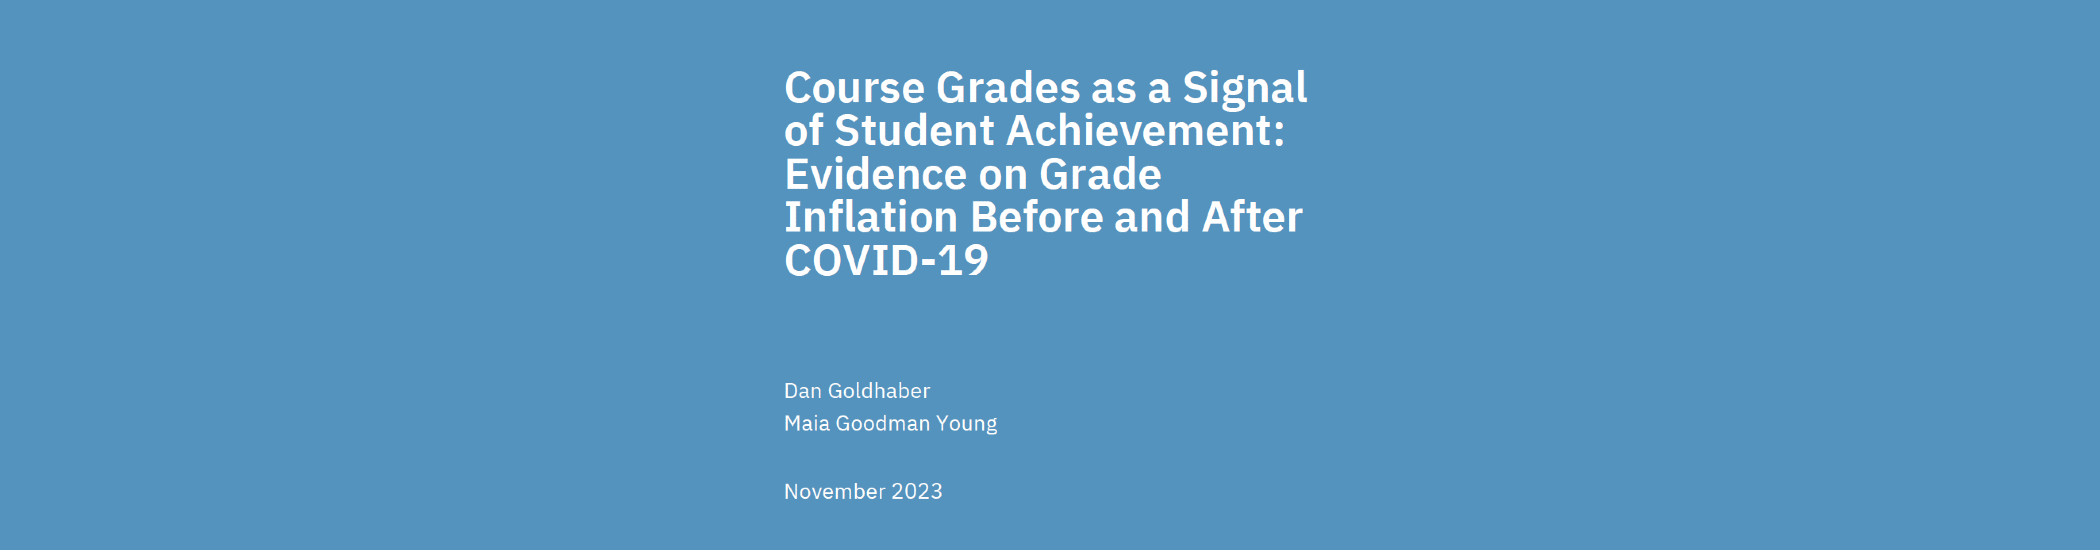 CALDER Brief | Course Grades as a Signal of Student Achievement: Evidence on Grade Inflation Before and After COVID-19